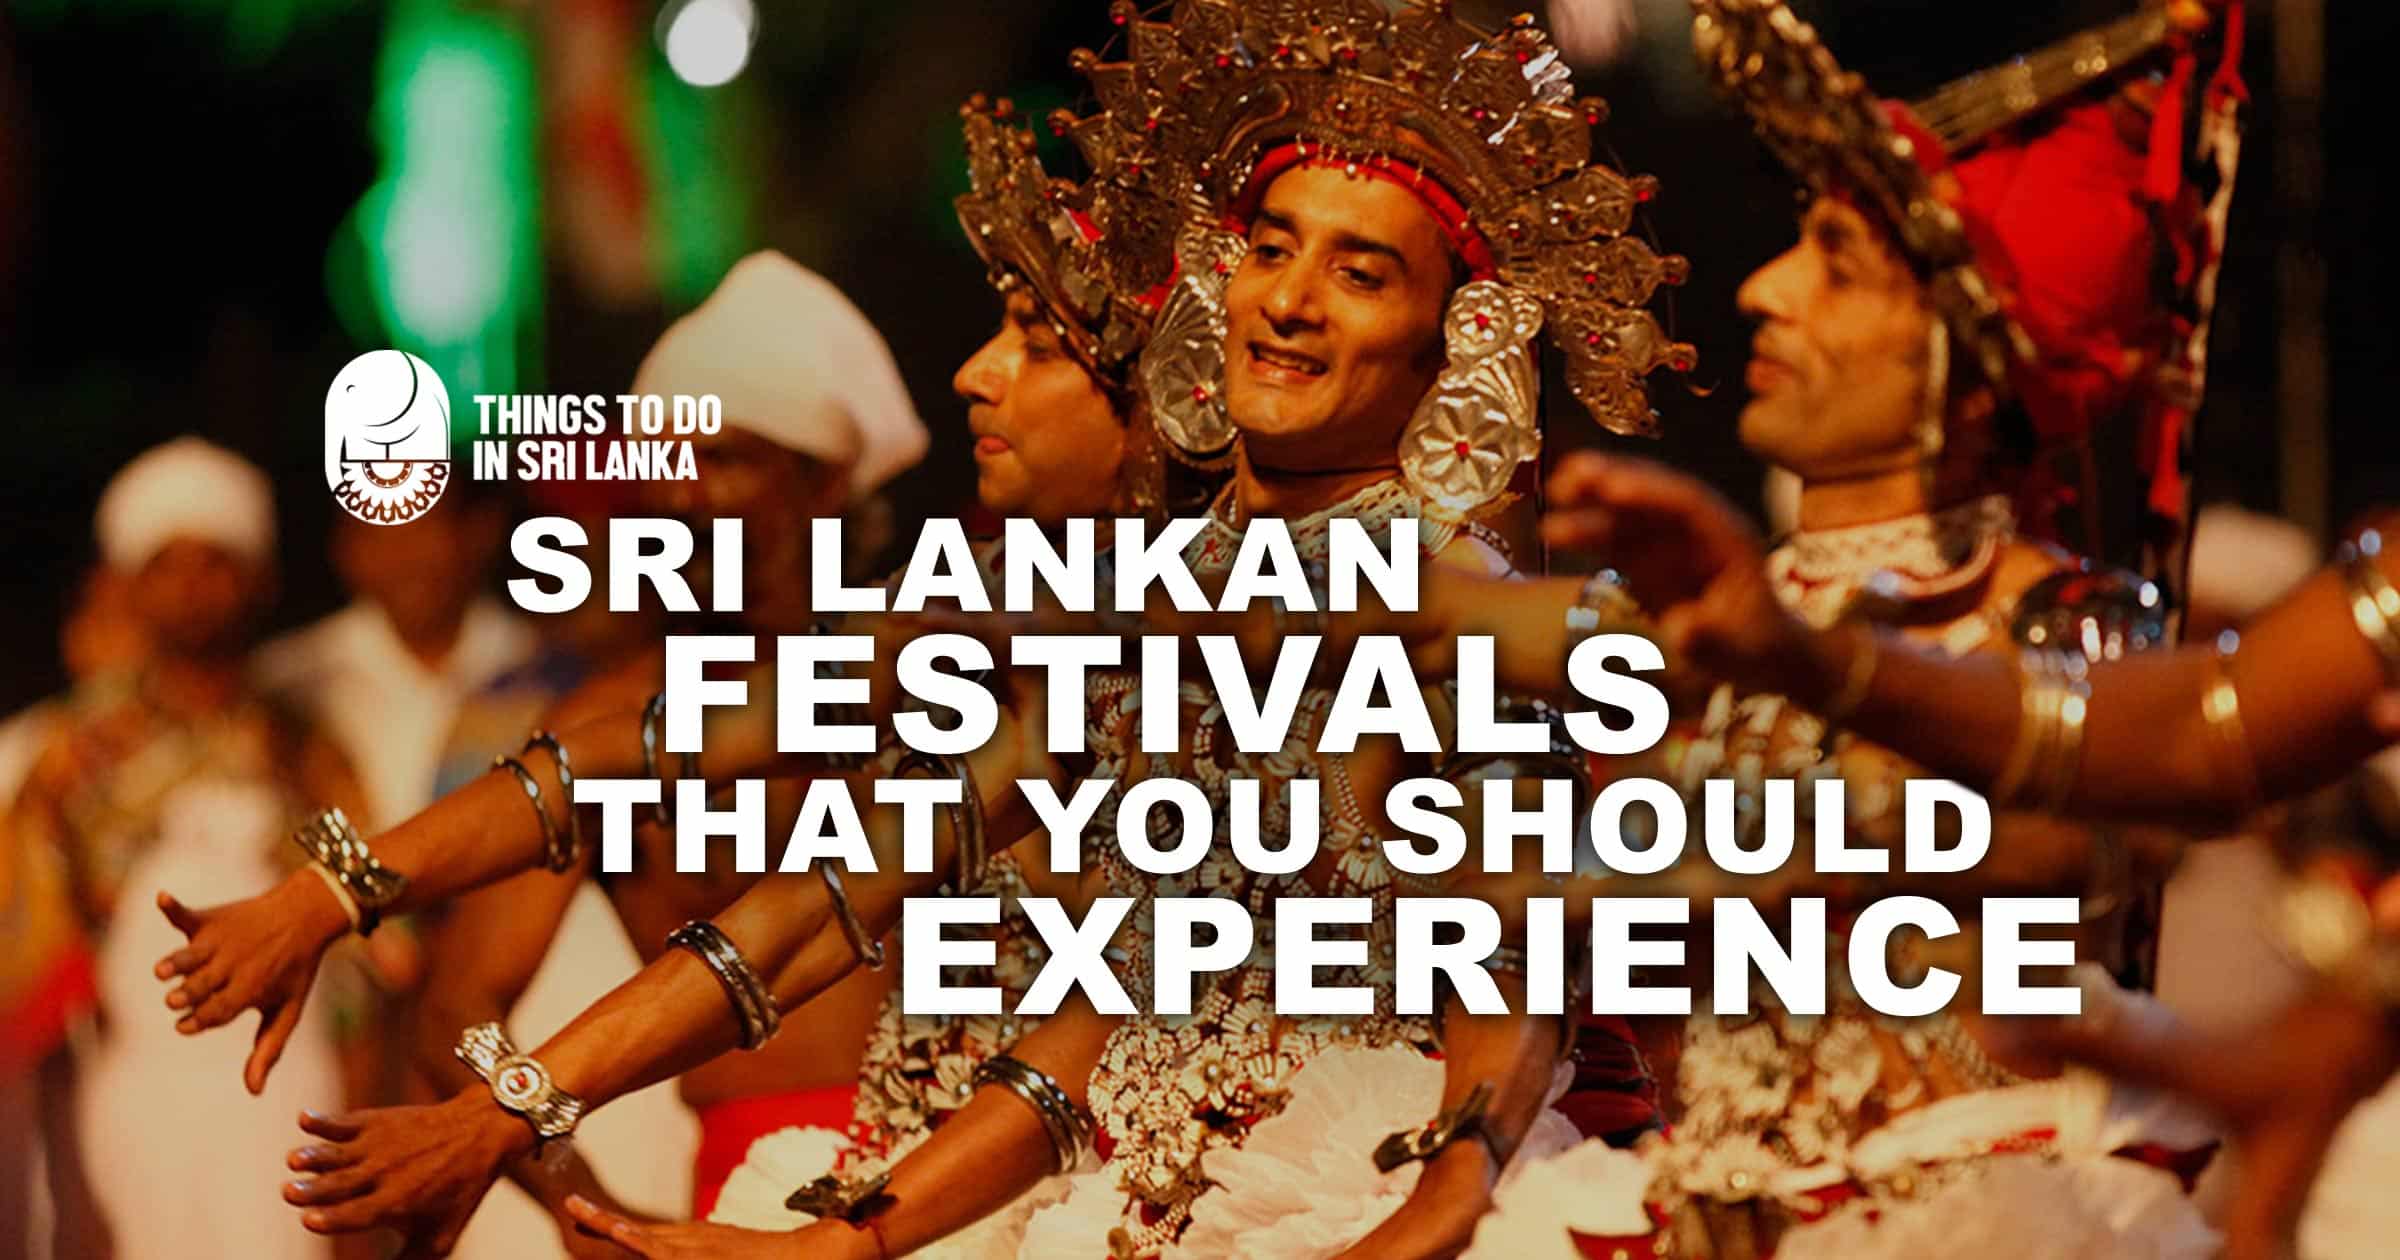 Sri Lankan Festivals that you should Experience